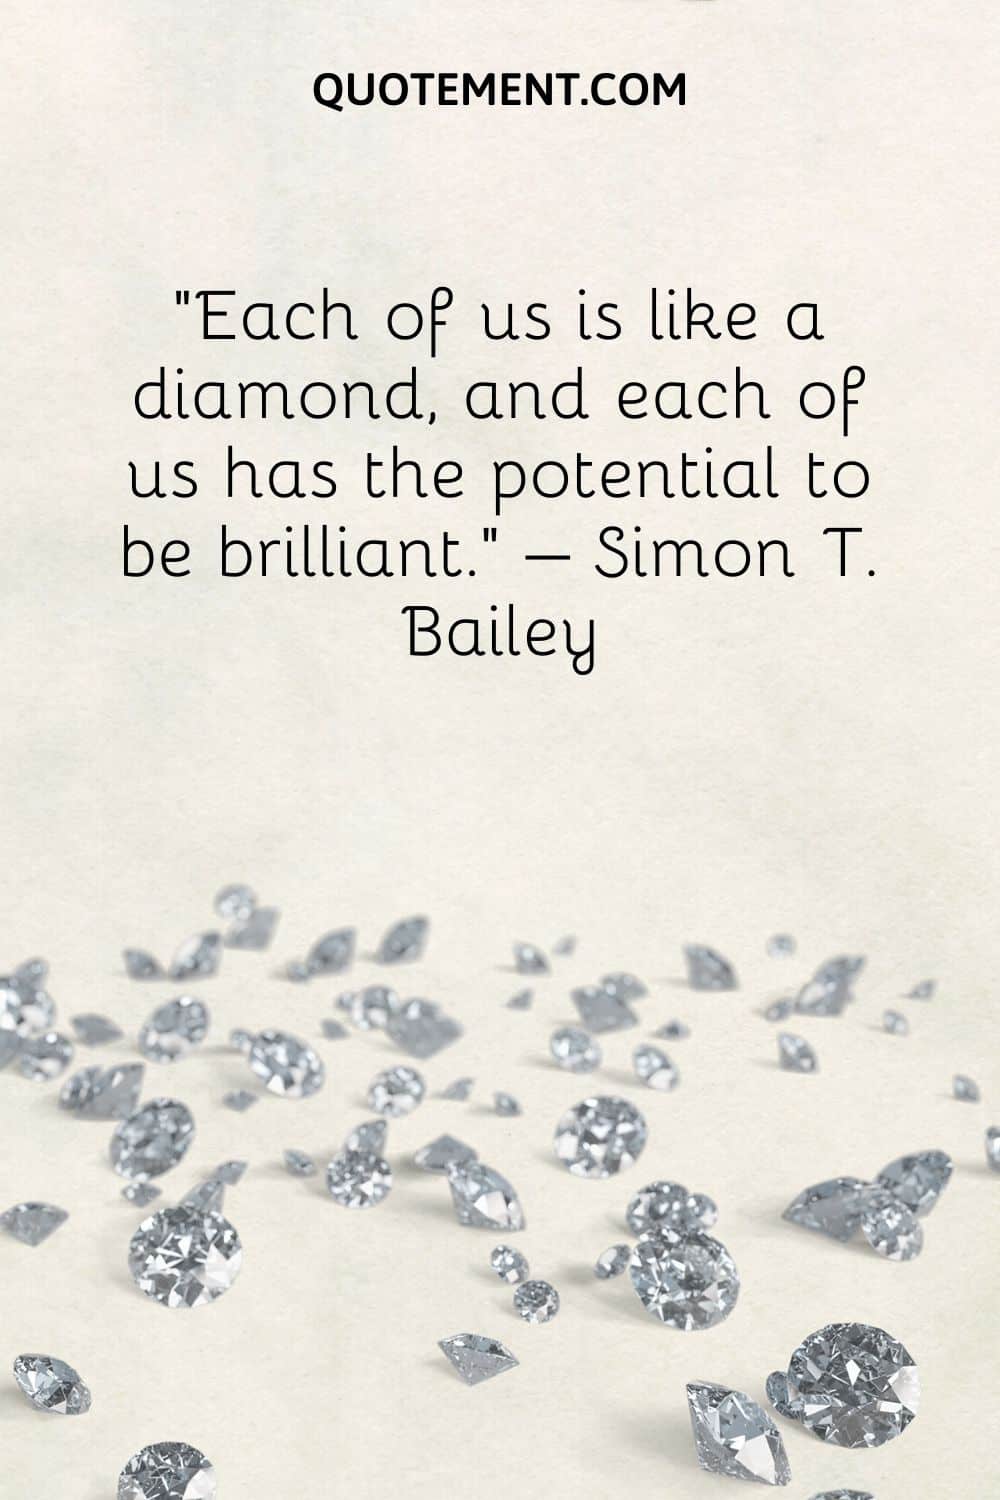 Each of us is like a diamond, and each of us has the potential to be brilliant.